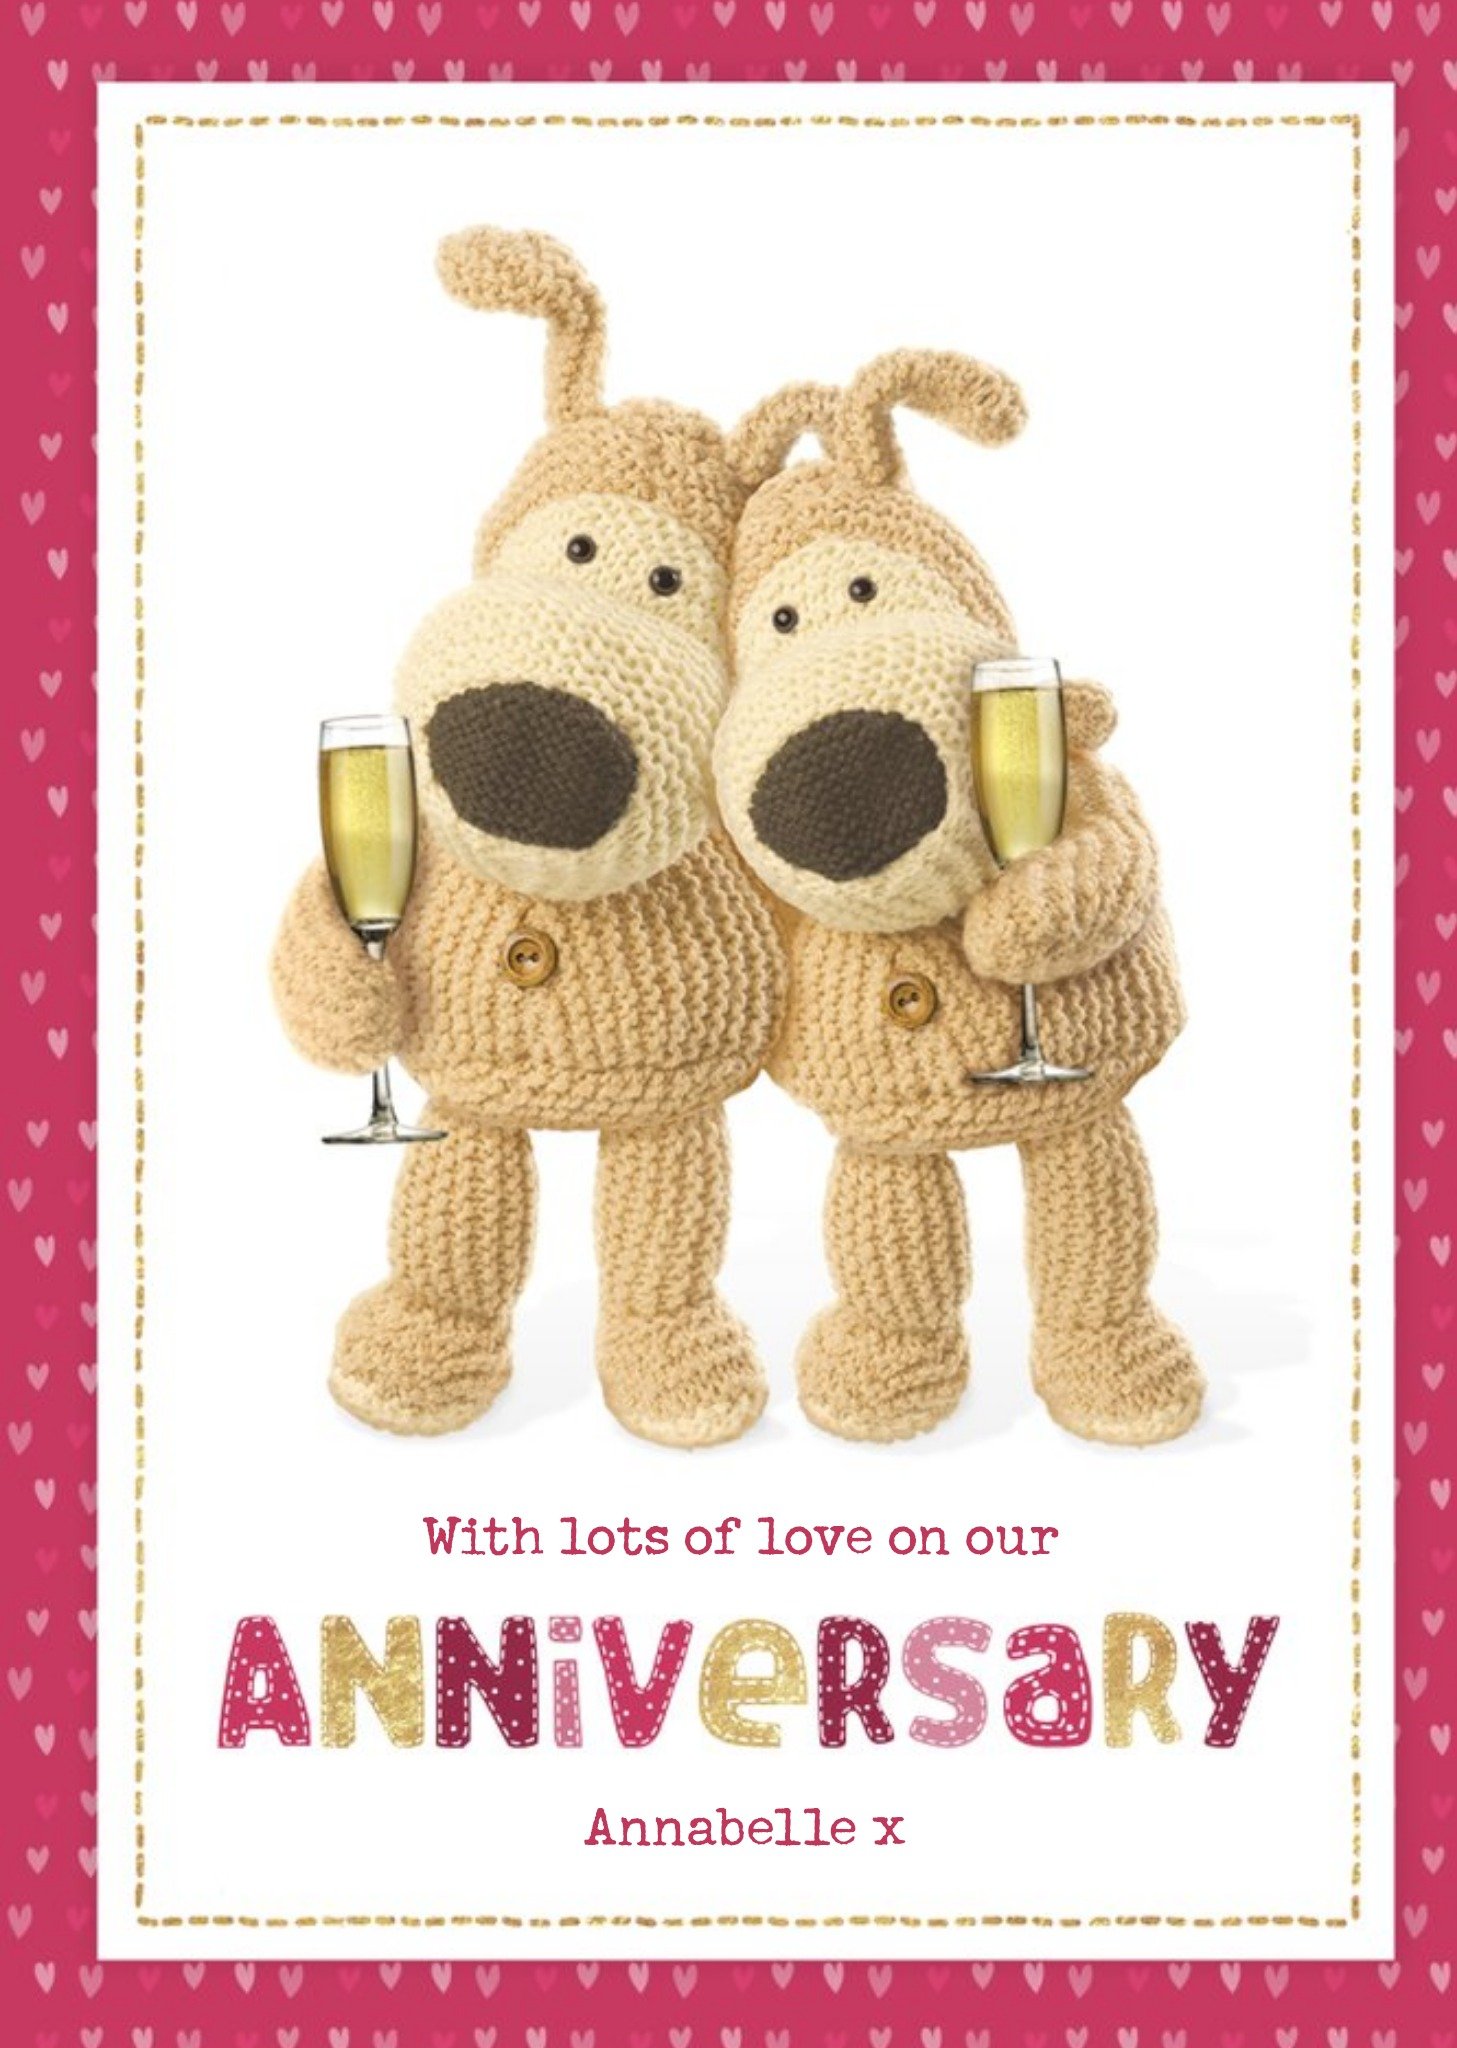 Boofle Cute Sentimental Lots Of Love On Our Anniversary Card, Large